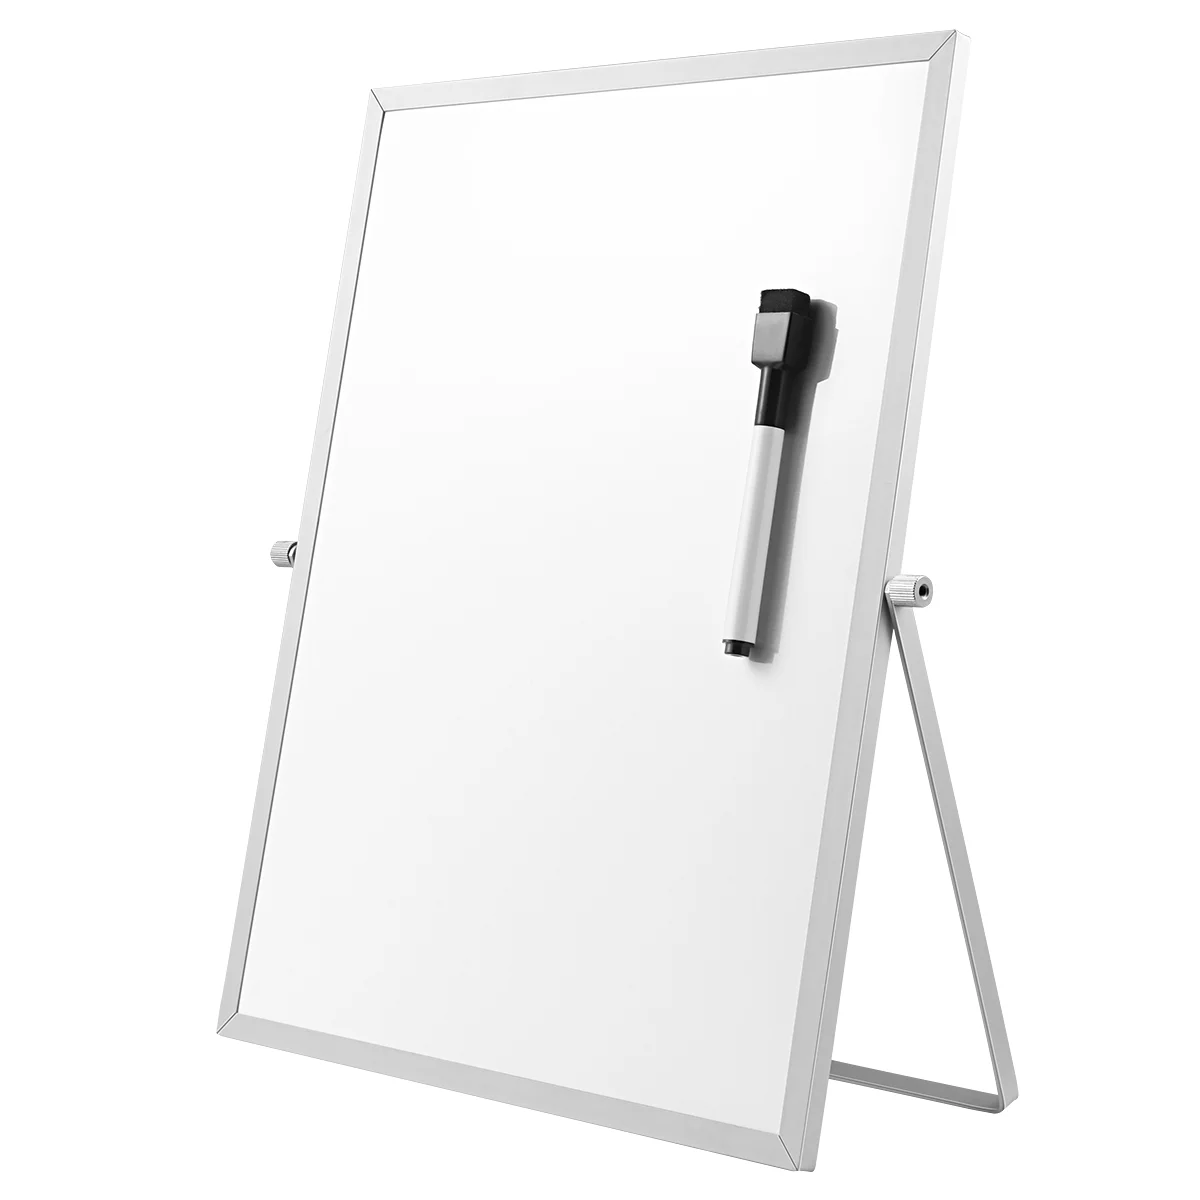 Magnetic White Board Dry Erase Board Double Sided Practical with Stand White Board for Office School Home Whiteboard Erasable